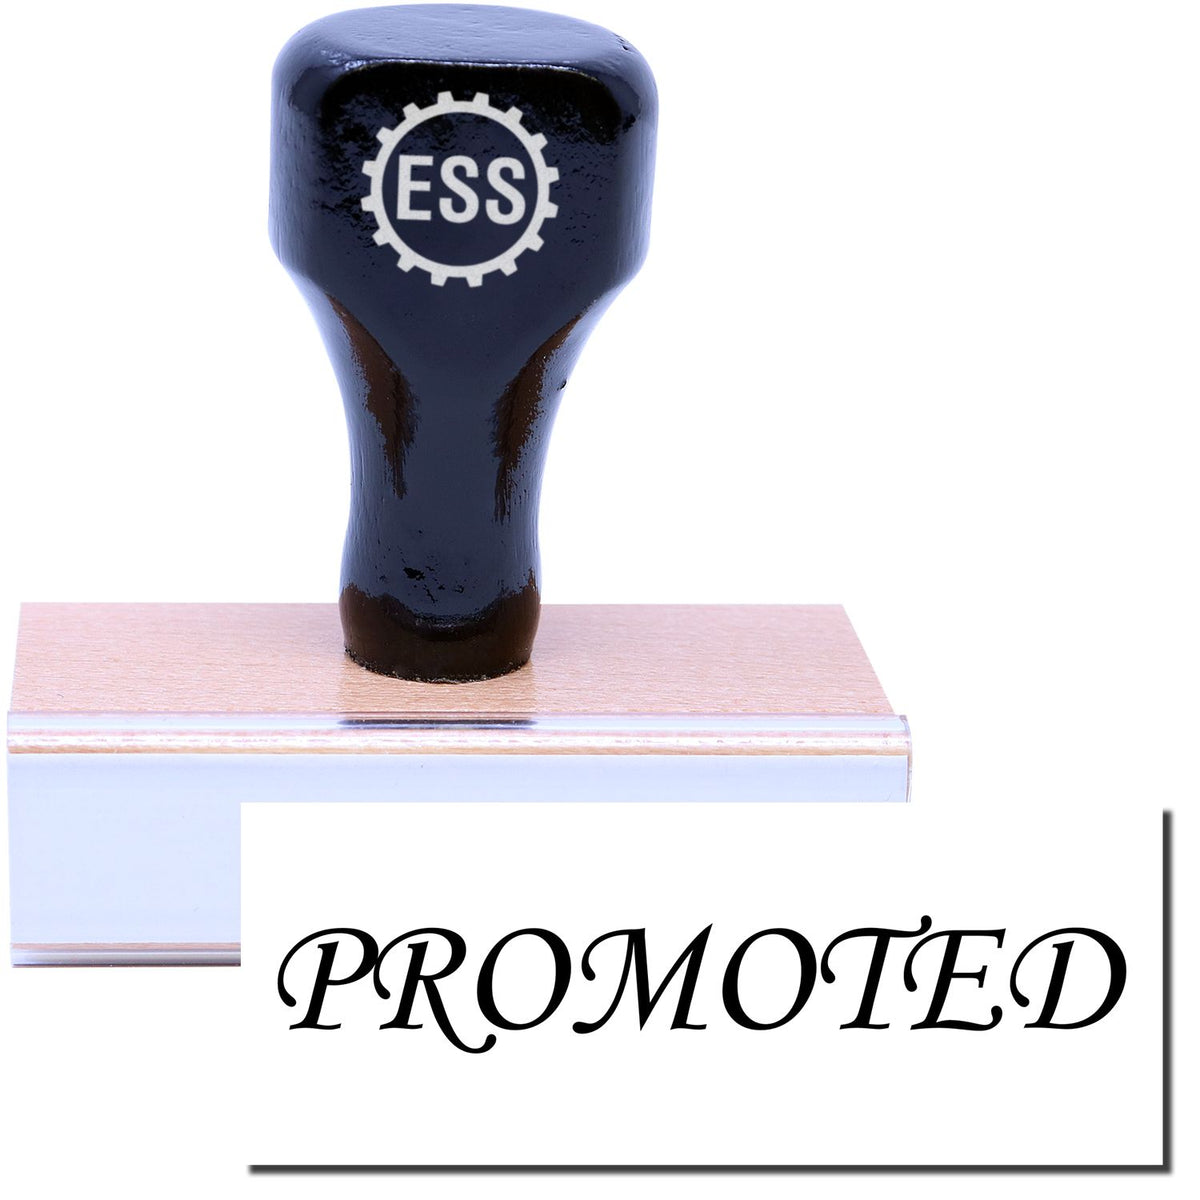 A stock office rubber stamp with a stamped image showing how the text &quot;PROMOTED&quot; is displayed after stamping.